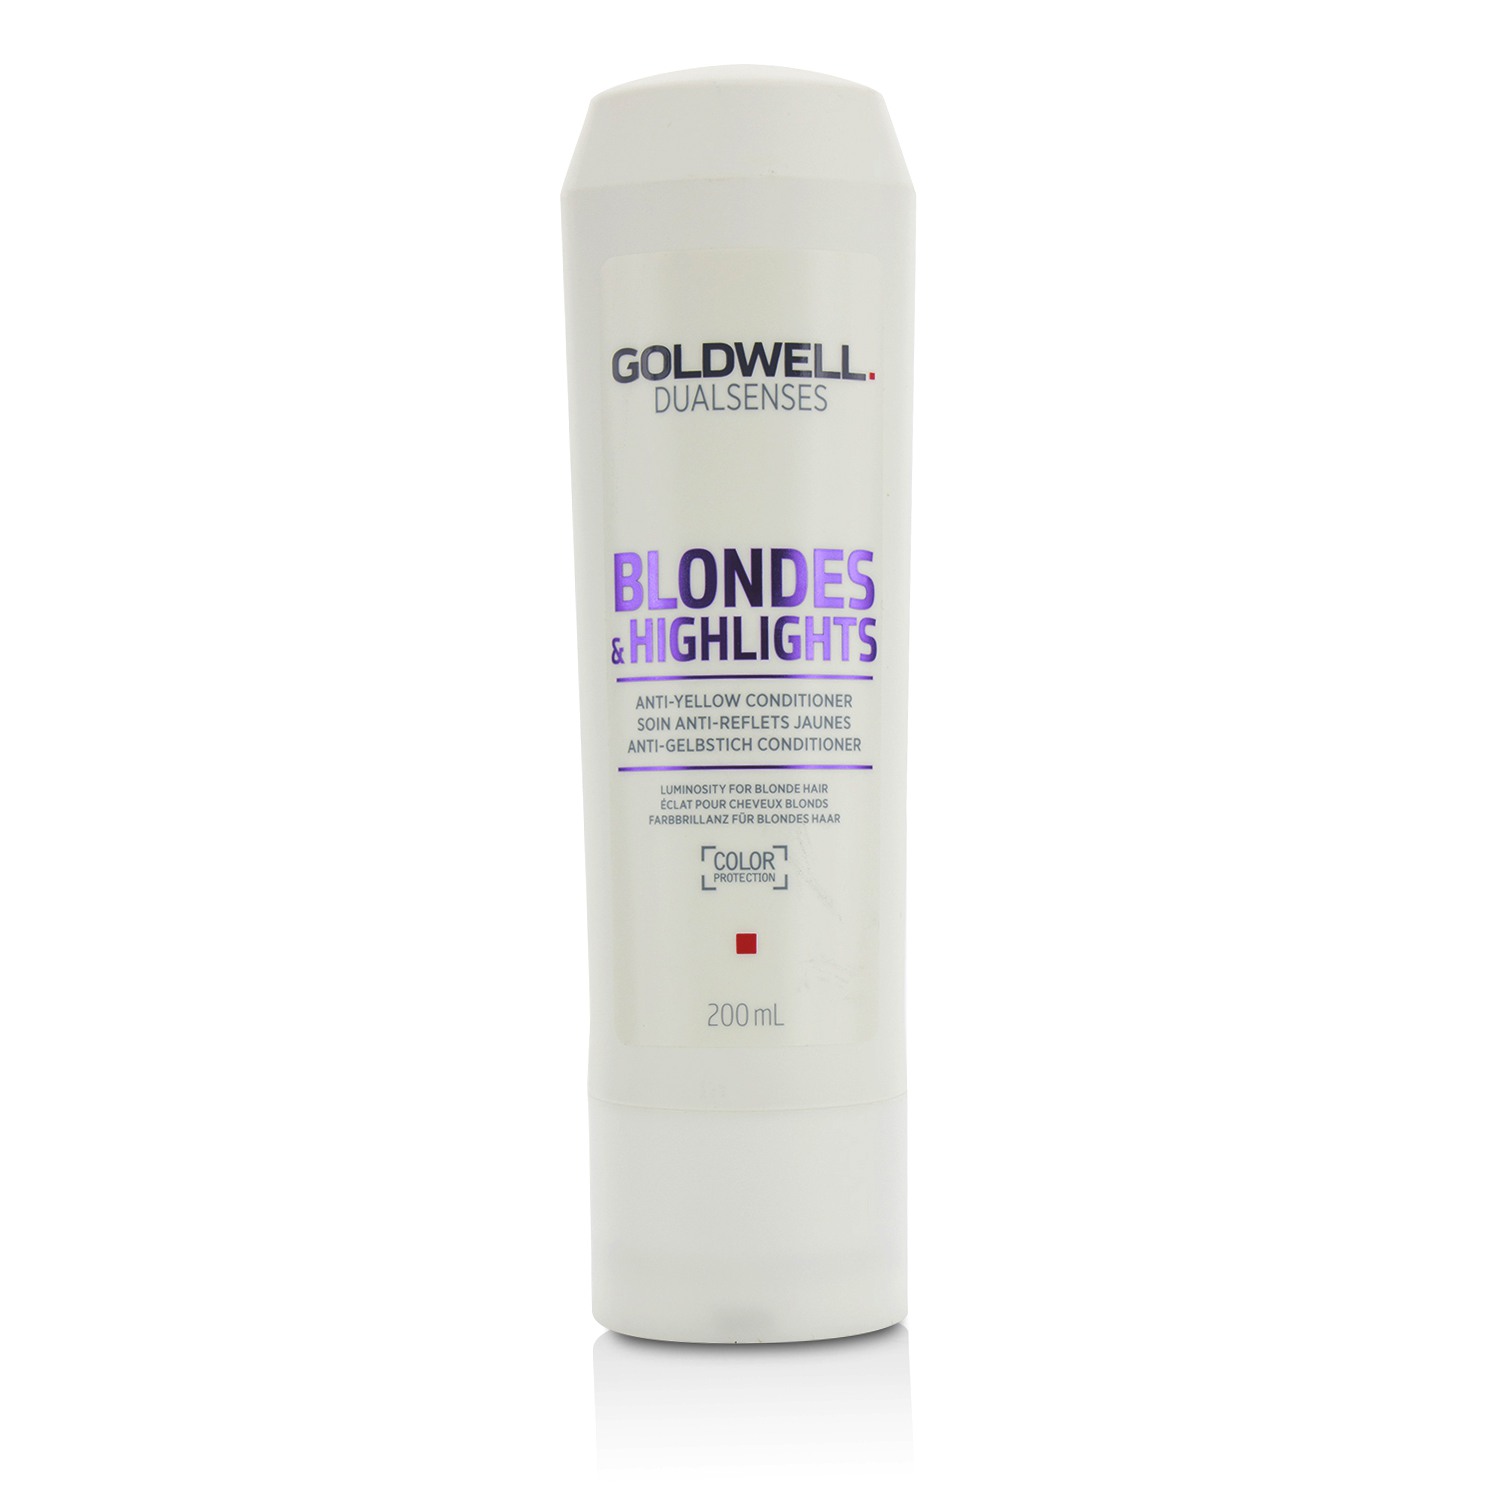 Dual Senses Blondes & Highlights Anti-Yellow Conditioner (Luminosity For Blonde Hair) Goldwell Image